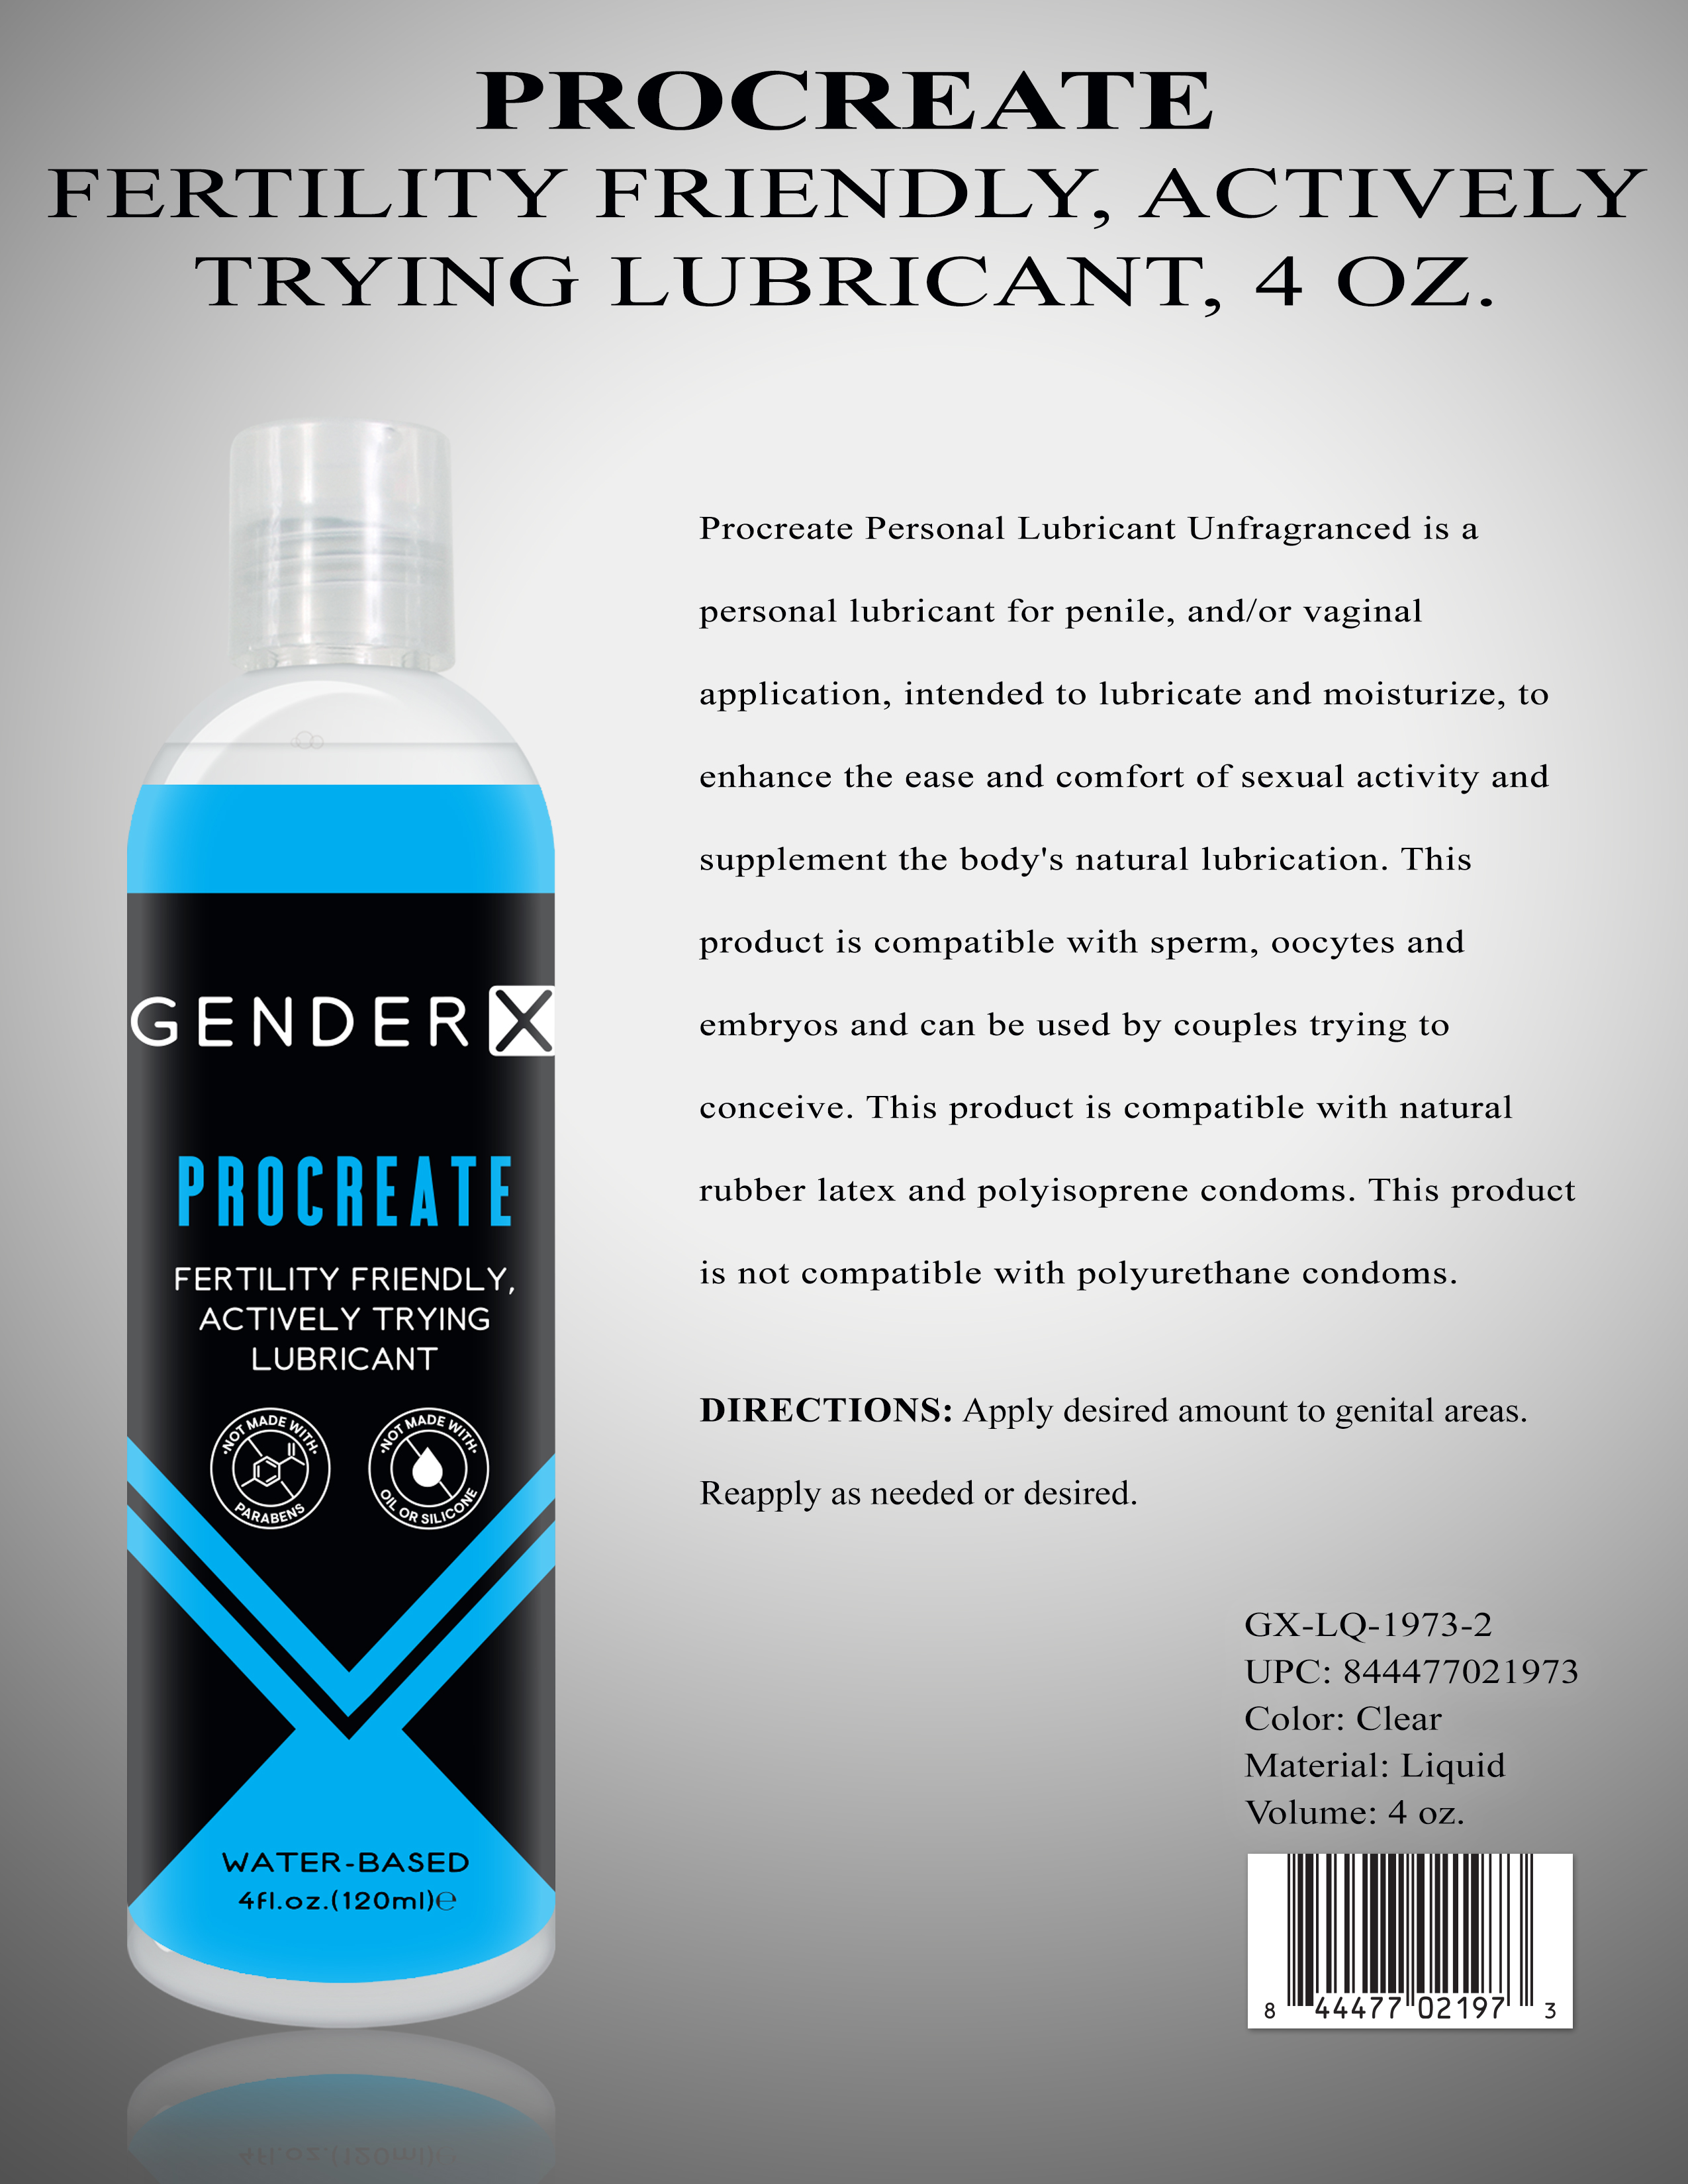 PROCREATE FERTILITY FRIENDLY ACTIVELY TRYING LUBRICANT - 4.0Z